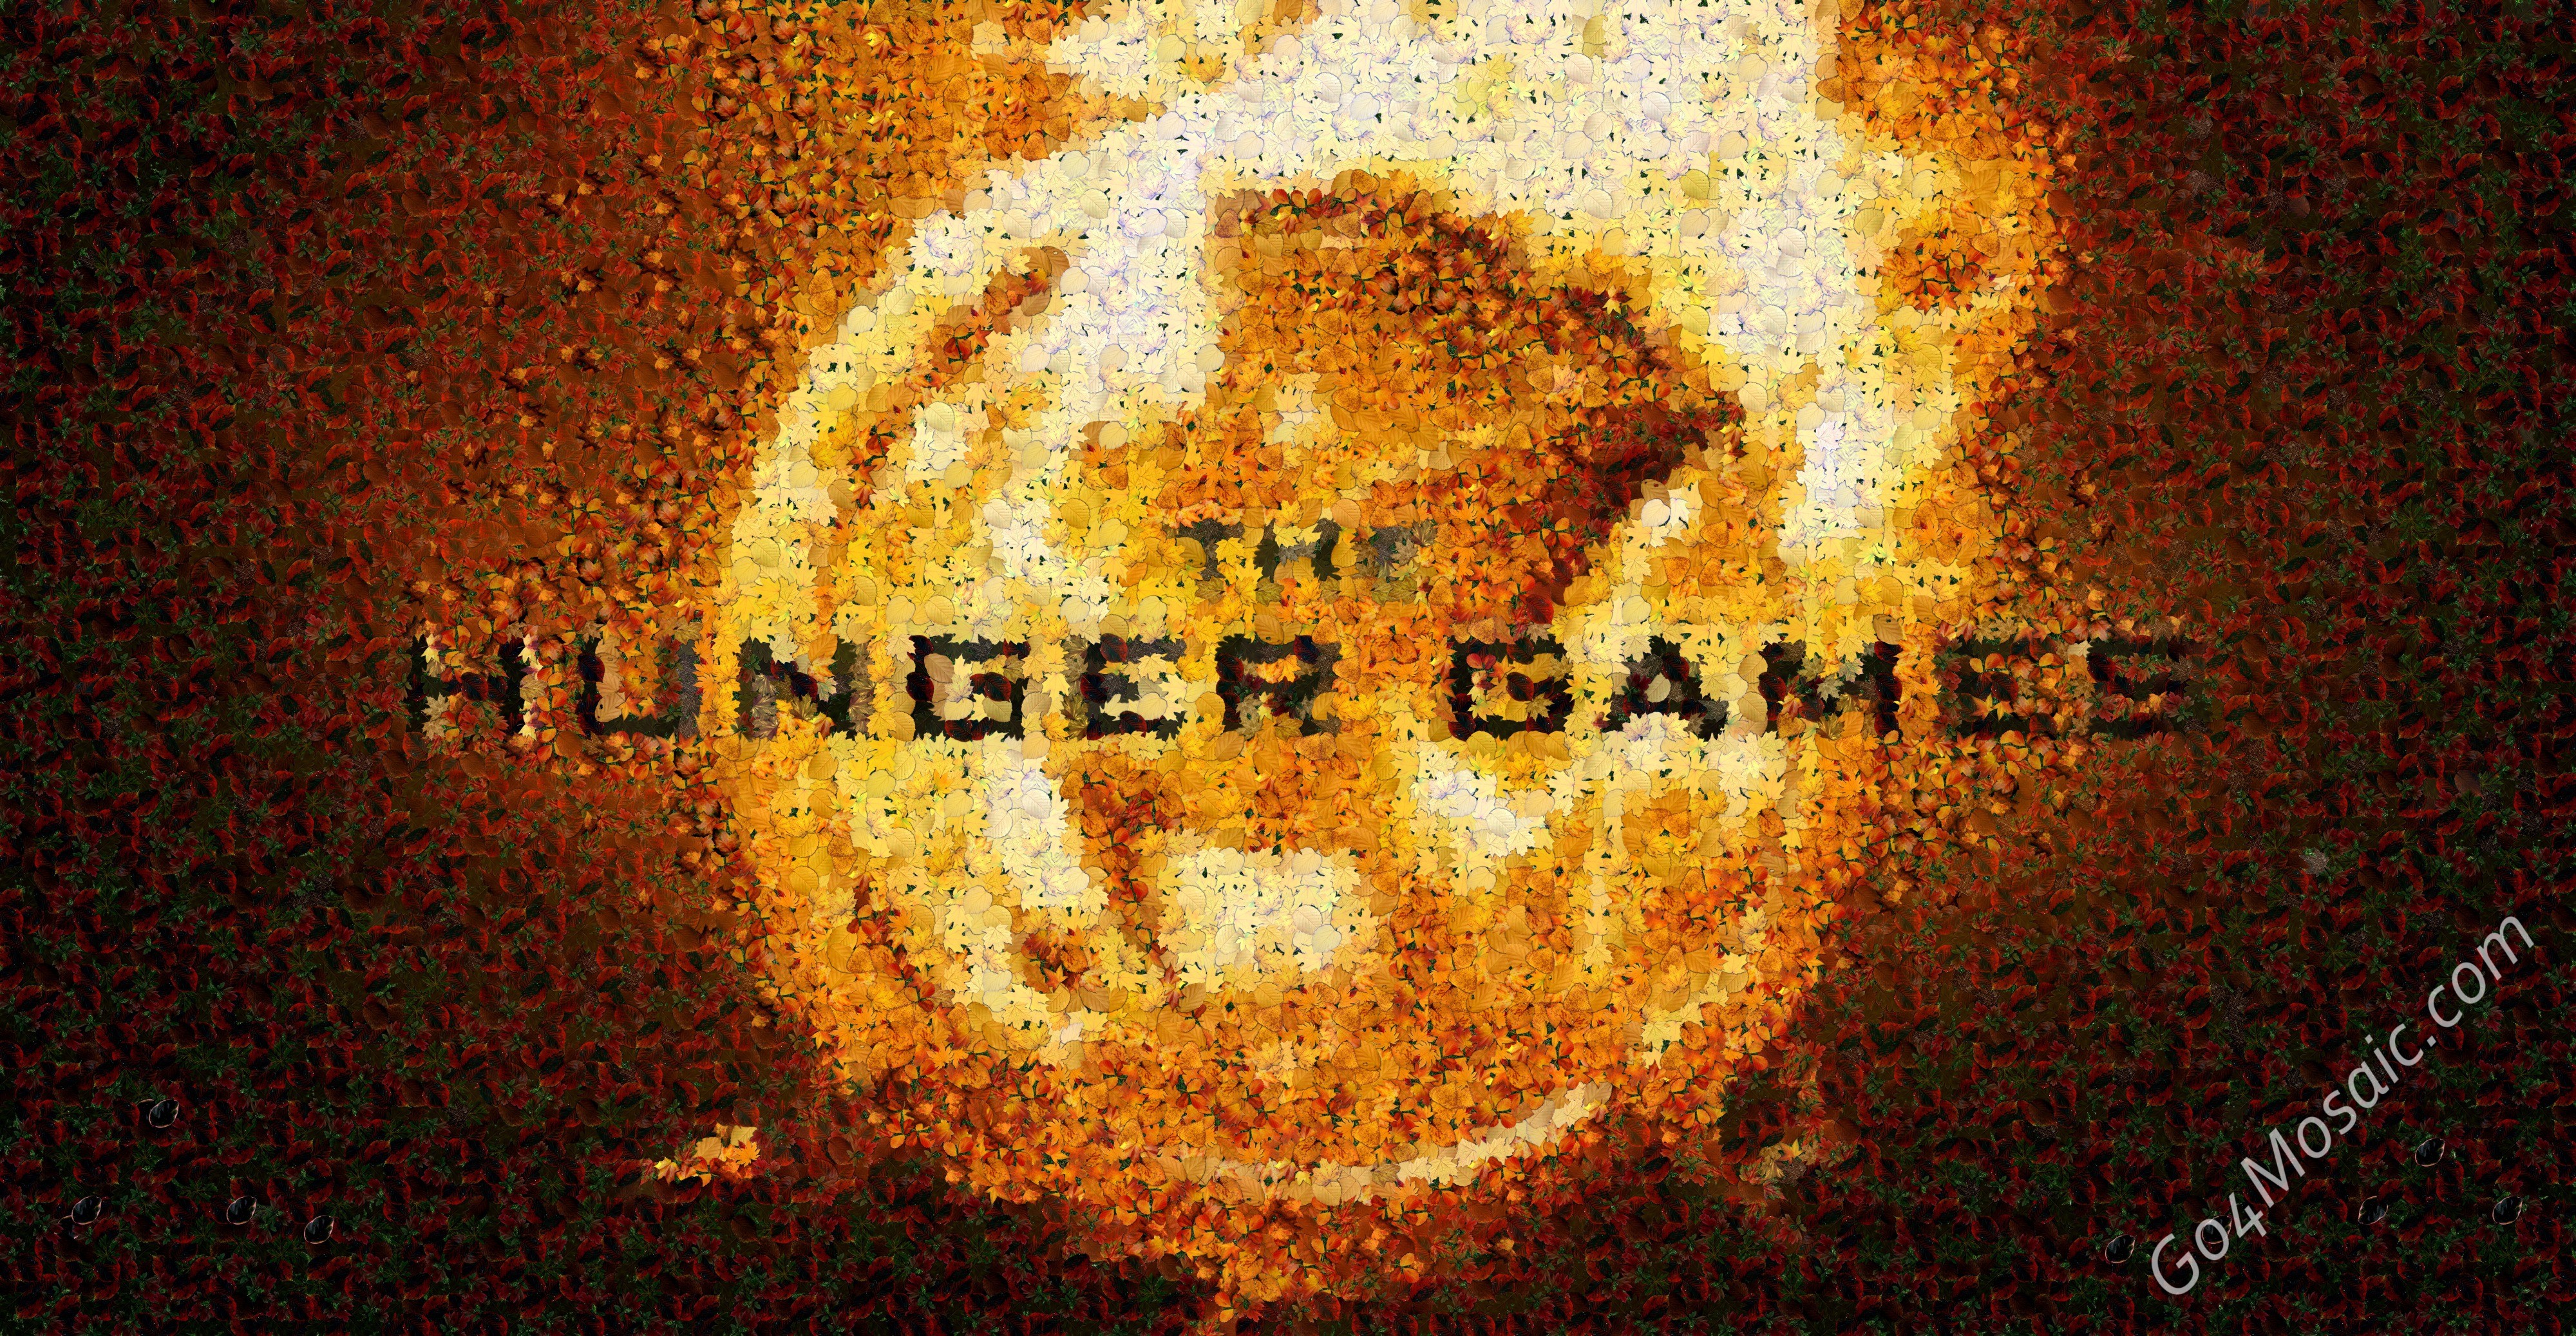 The Hunger Games Logo mosaic from Leaves